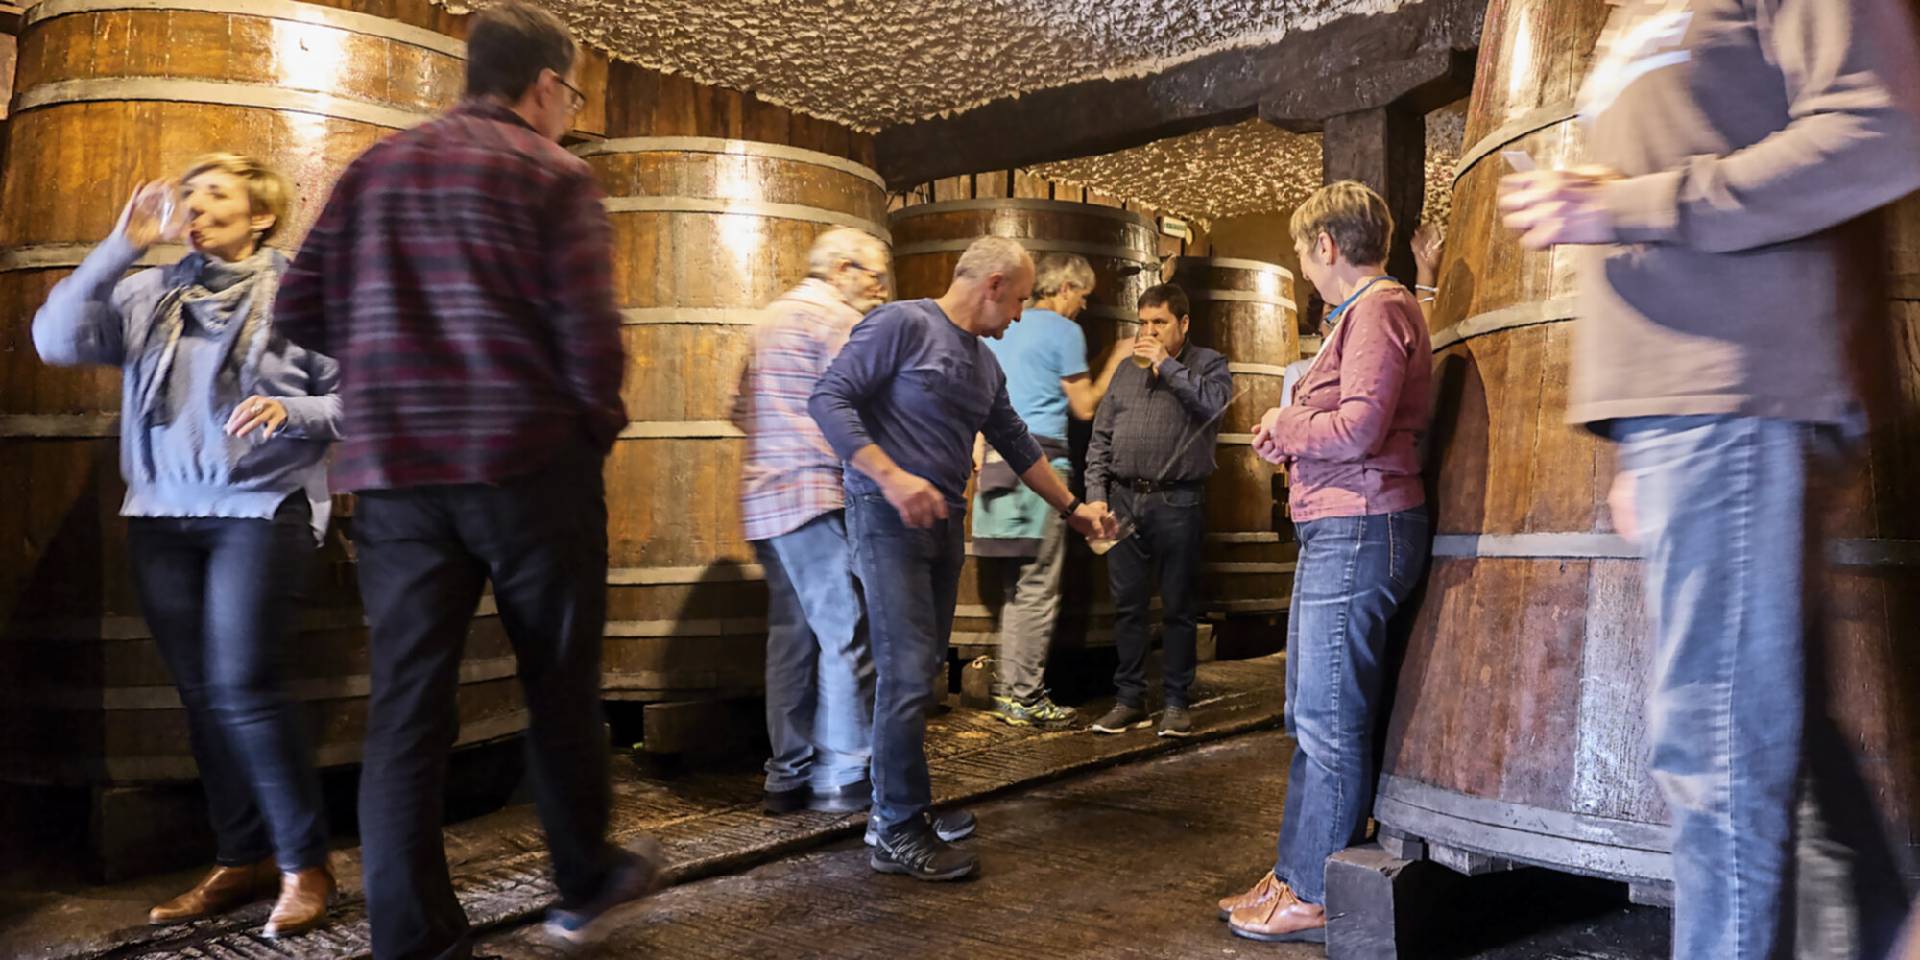 Group  in a cider cellar